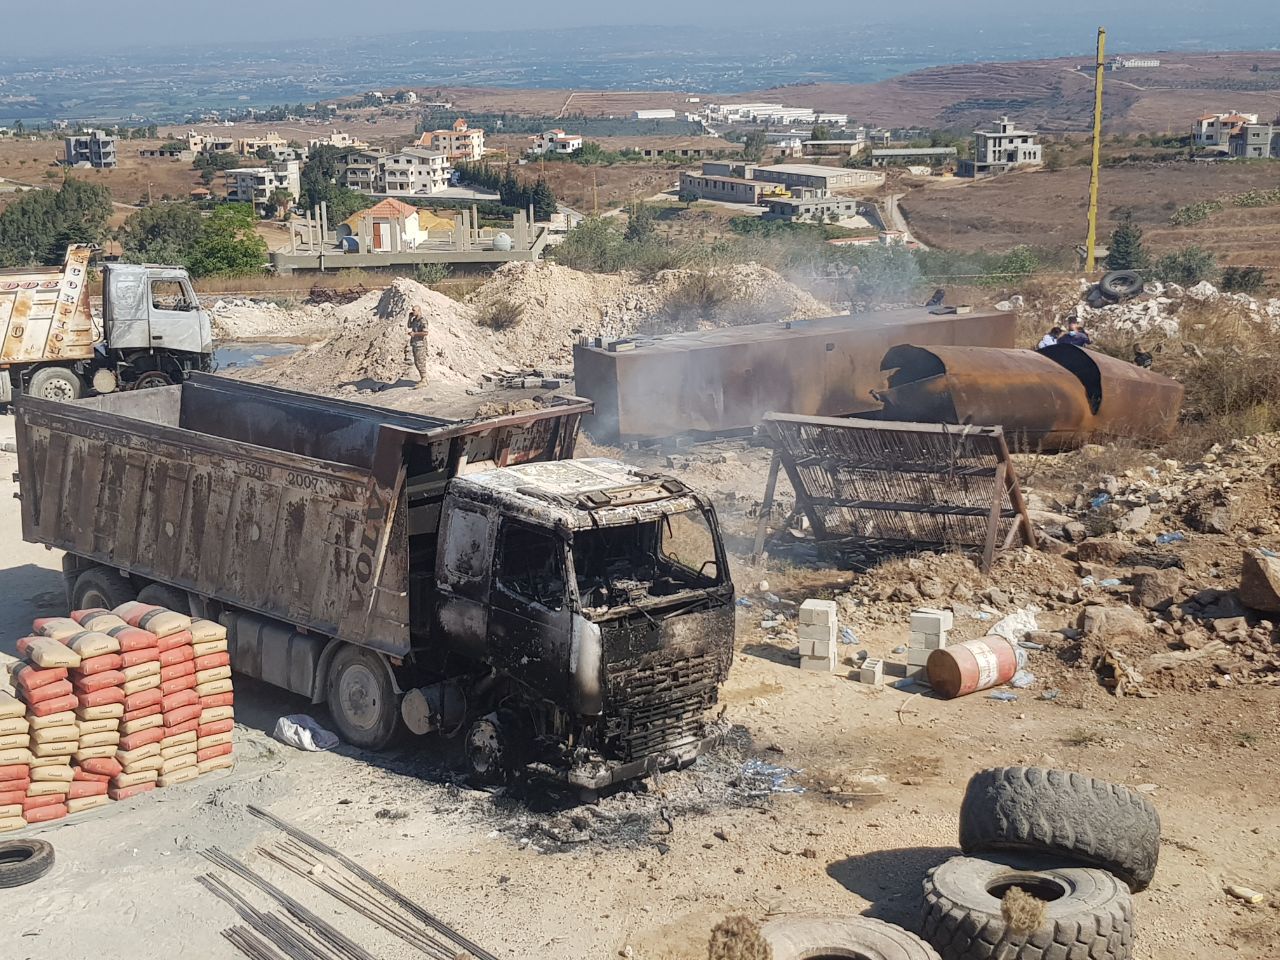 A view from the scene after dozens were killed and injured when a fuel tanker exploded in the Akkar region of northern Lebanon